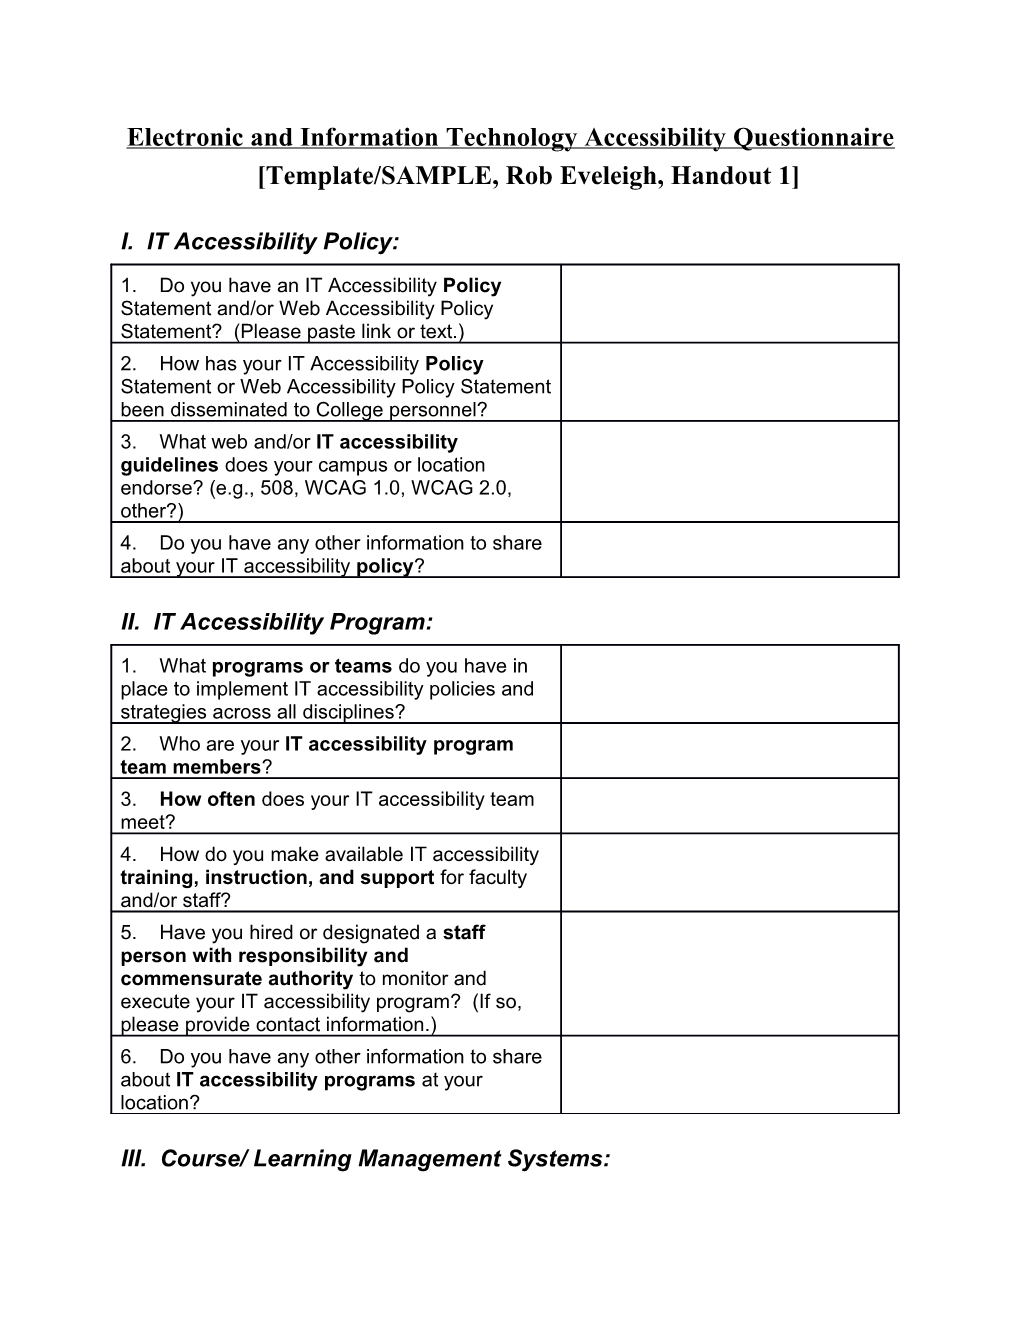 Electronic and Information Technology Accessibility Questionnaire Template/SAMPLE, Rob